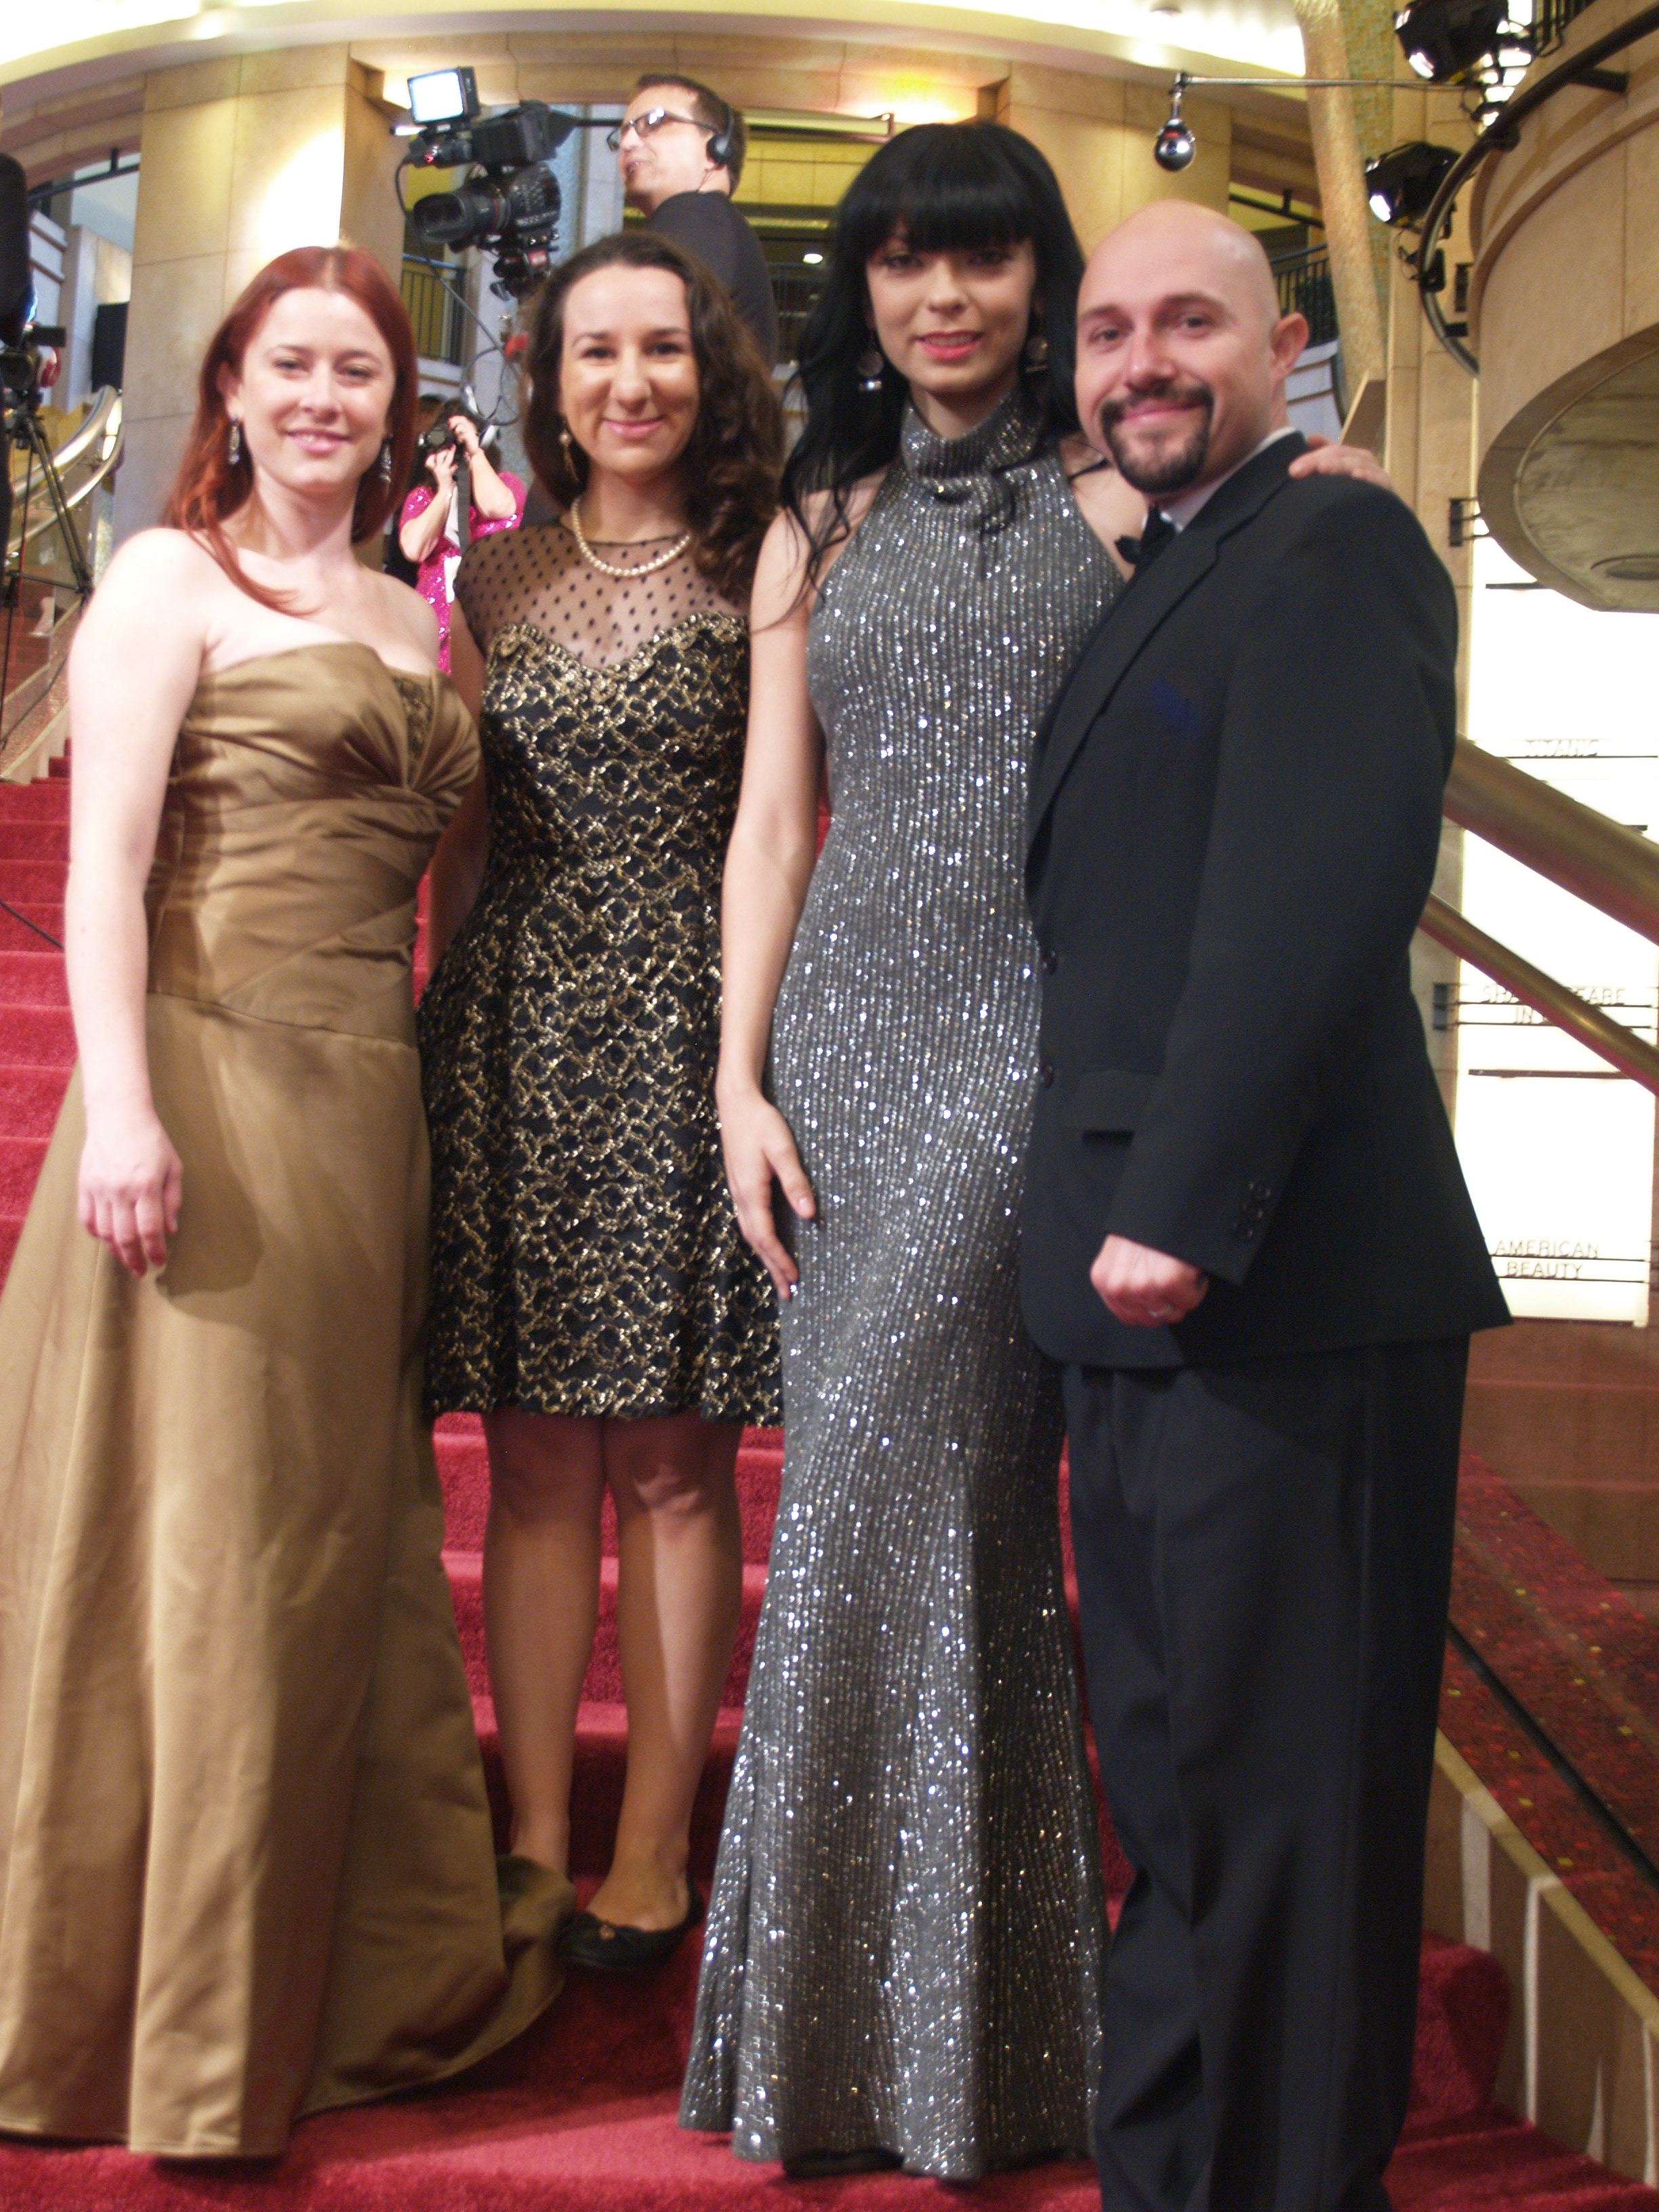 Tellier Killaby, Christin Jezak, Elle Viane Sonnet, and Adam Sonnet at event of The 86th Annual Academy Awards (2014)